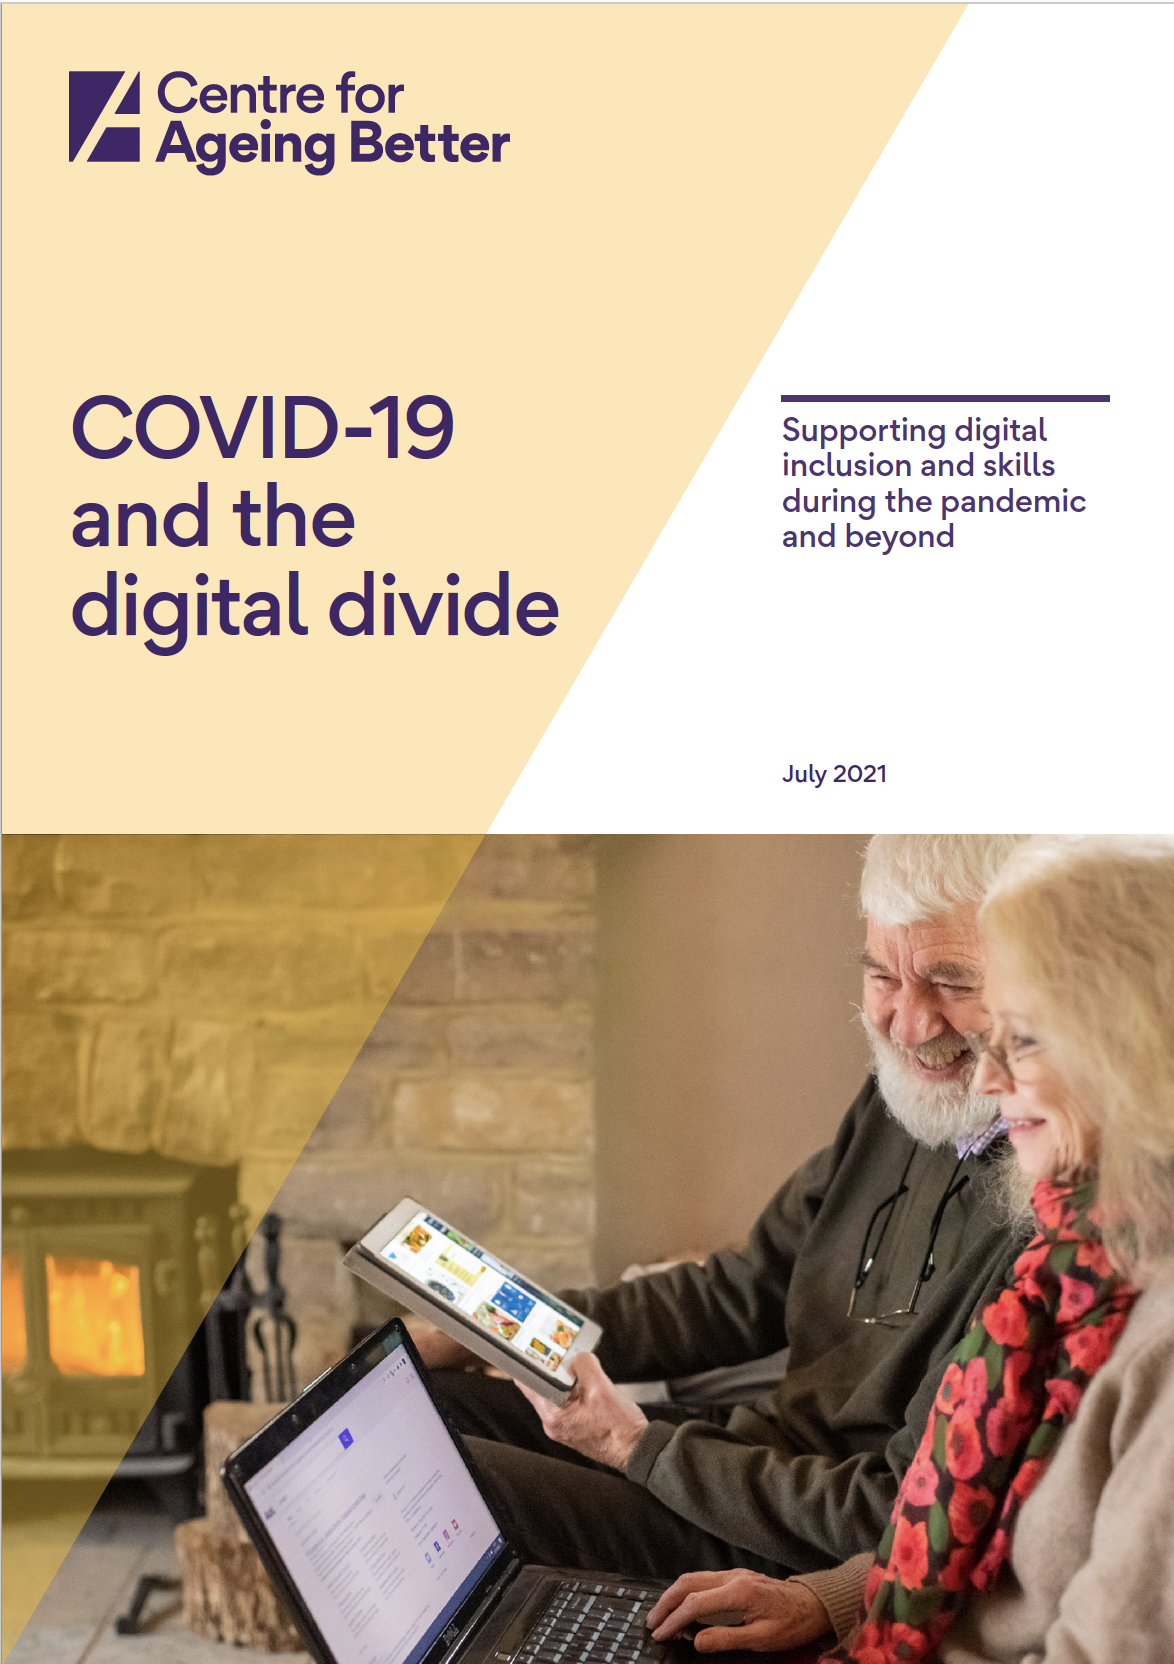 Image shows the front cover of the report, which is titled Covid-19 and the digital divide